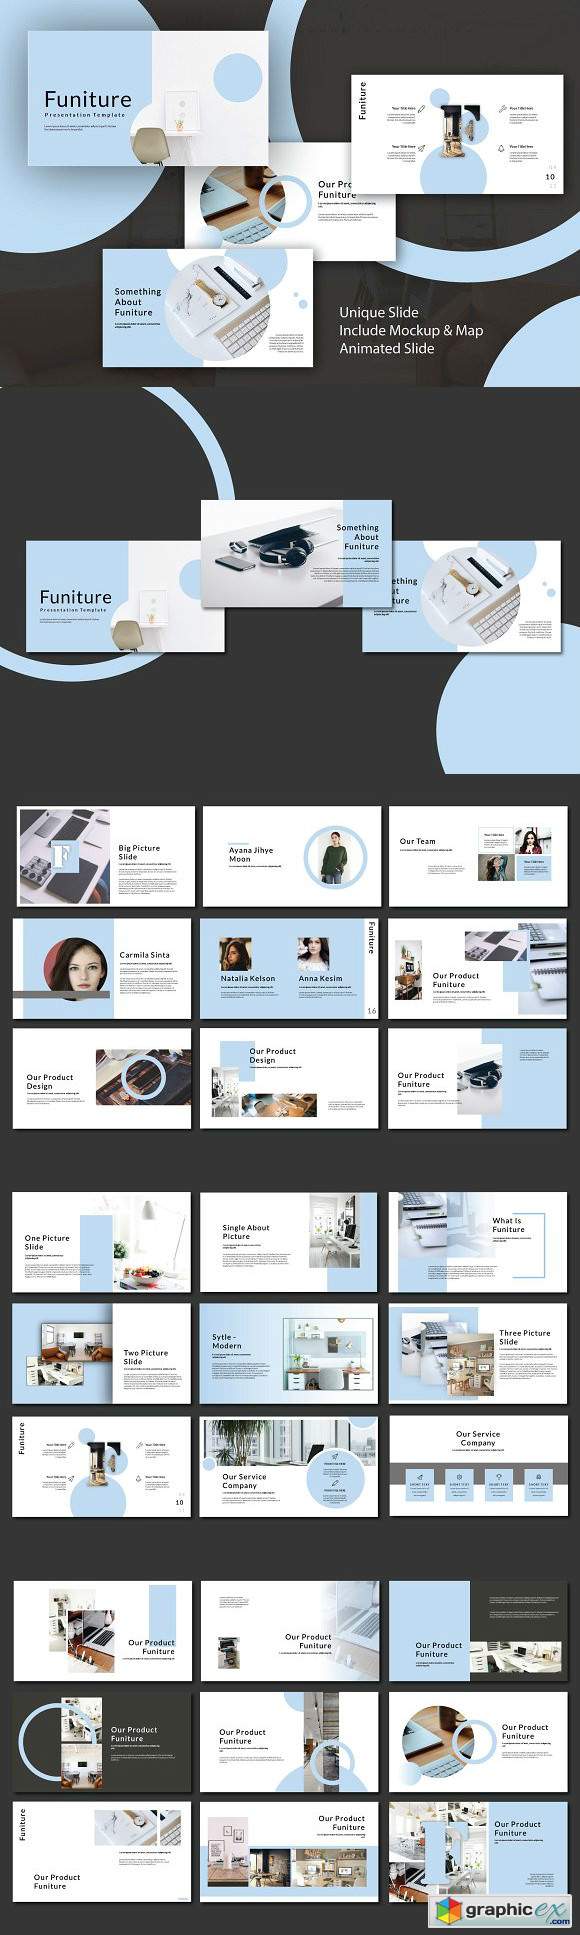 Funiture Powerpoint Template